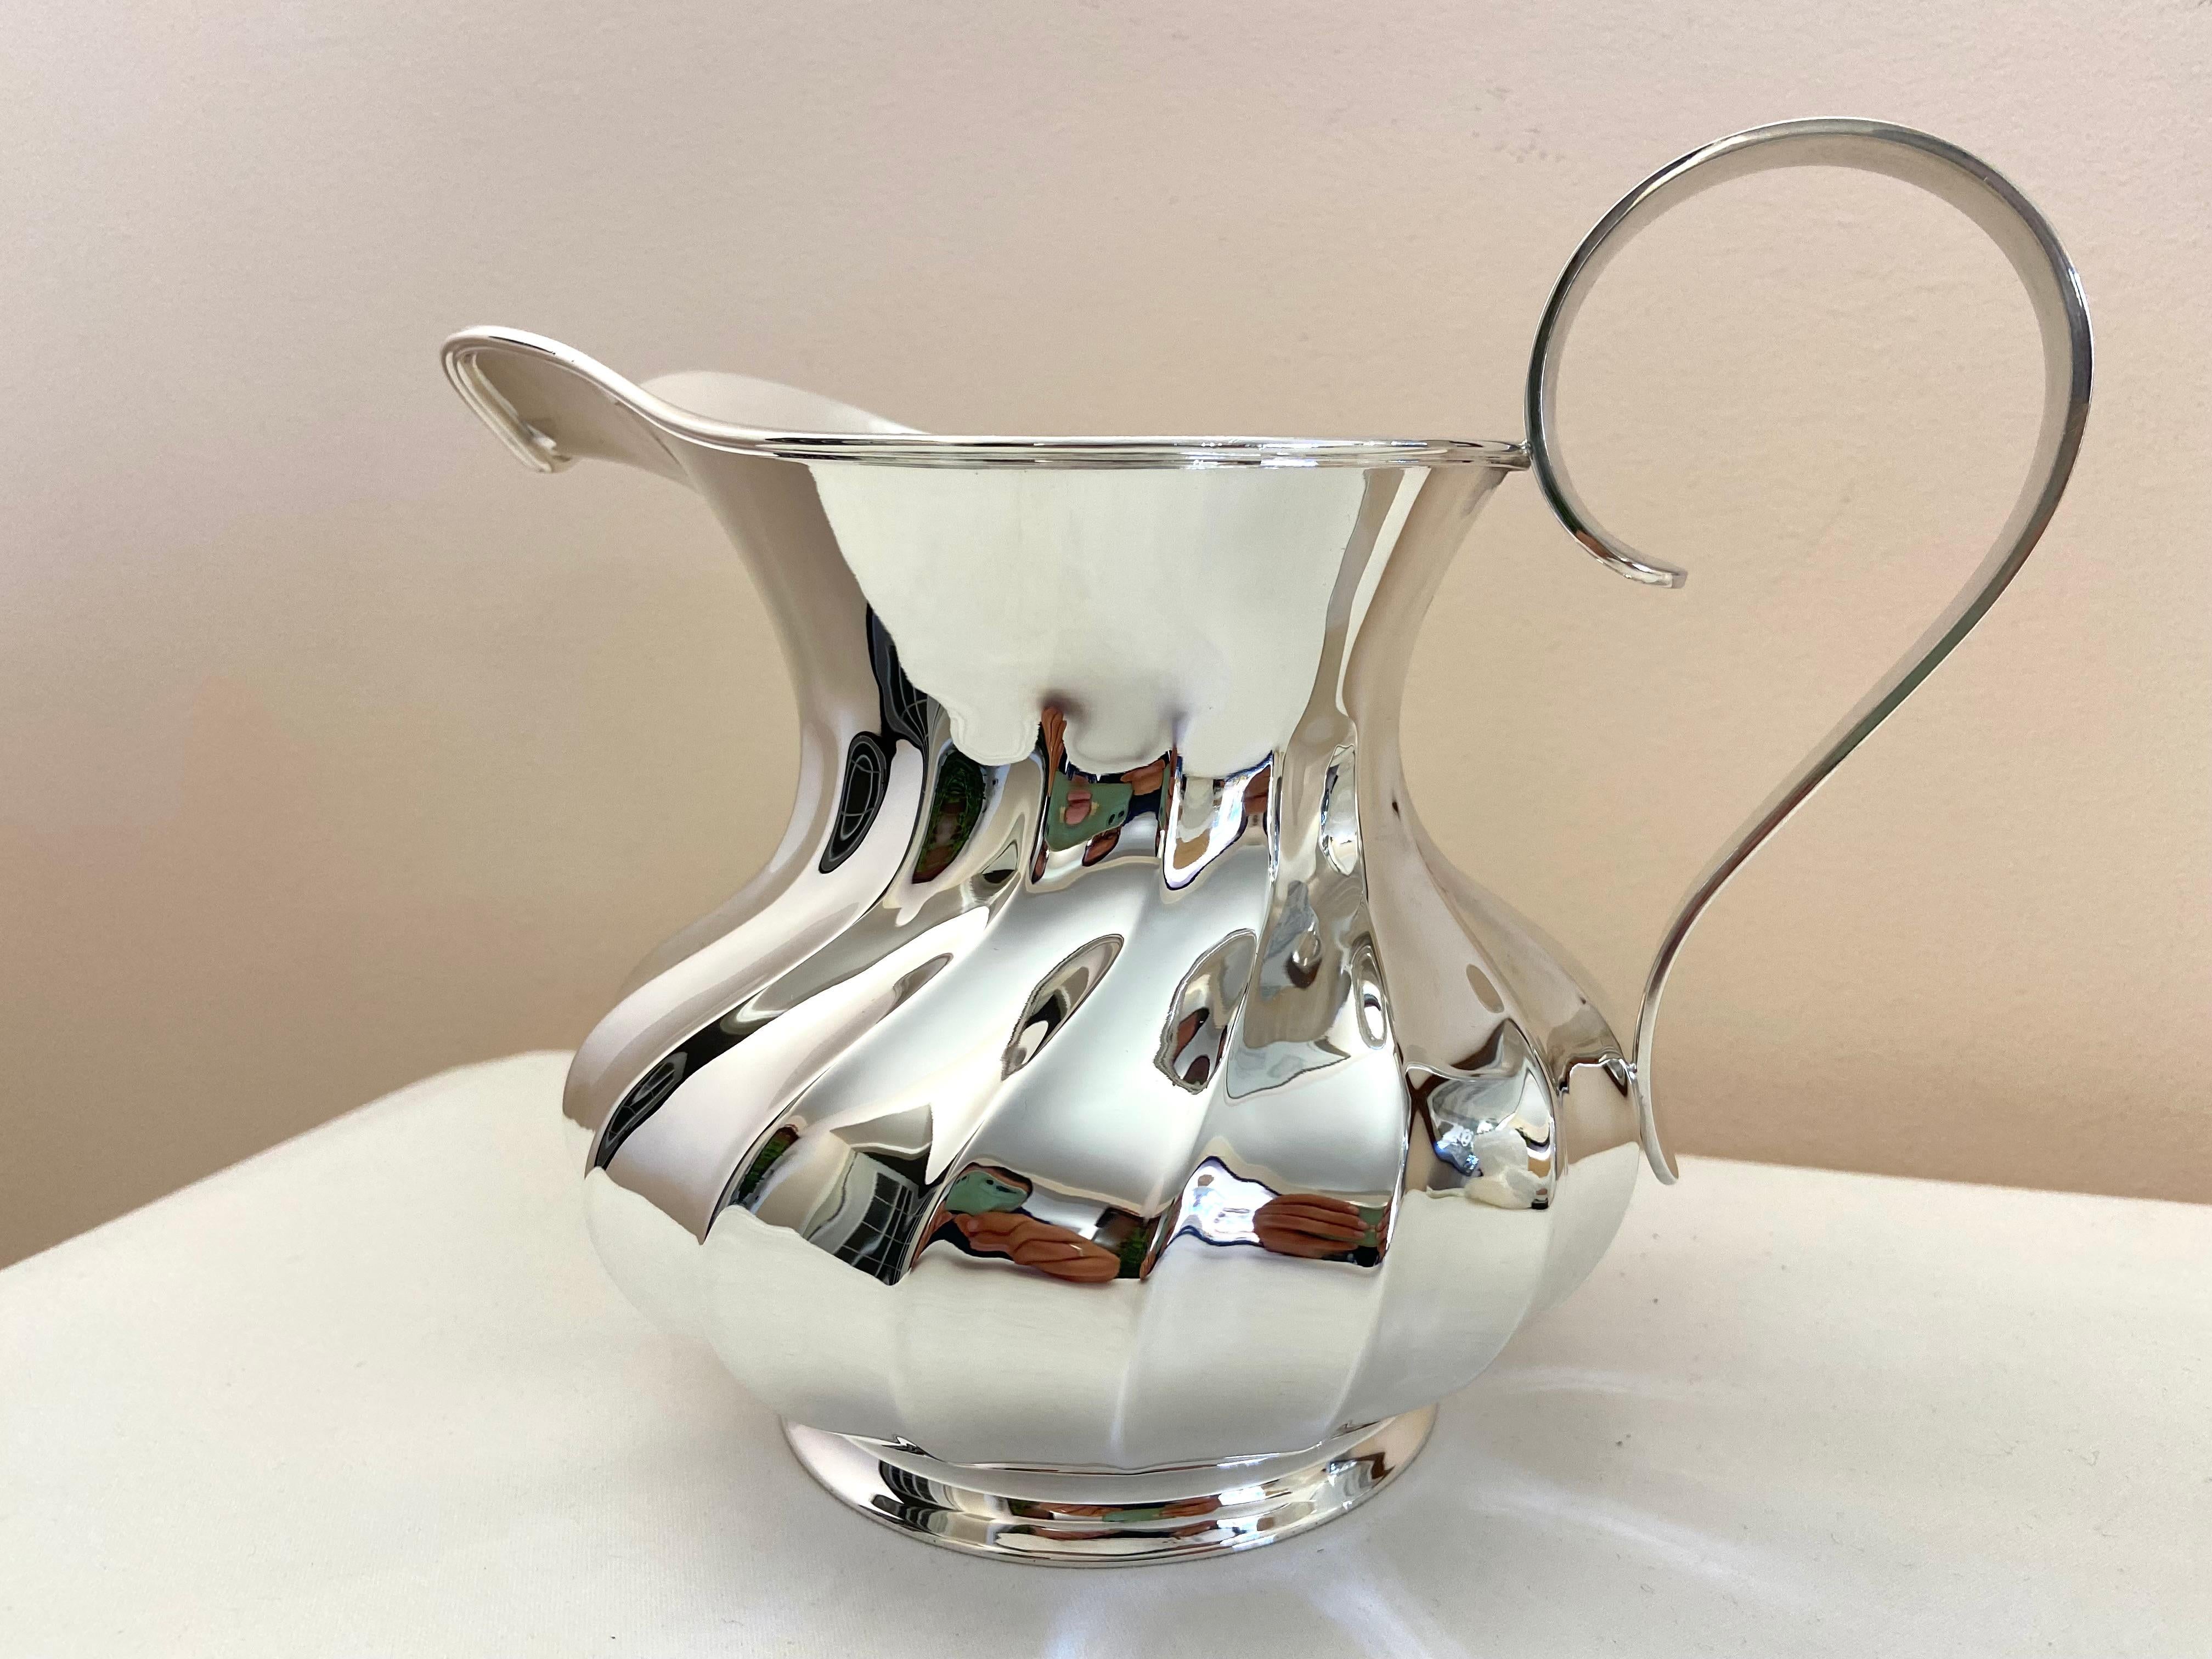 800 Silver Pitcher, new item from my jewelry. Zaramella, silversmith in Padua (Italy);19 cm high and 22 cm wide; It weighs 625 grams. Silver title 800 thousandths. Regularly stamped with state marks.